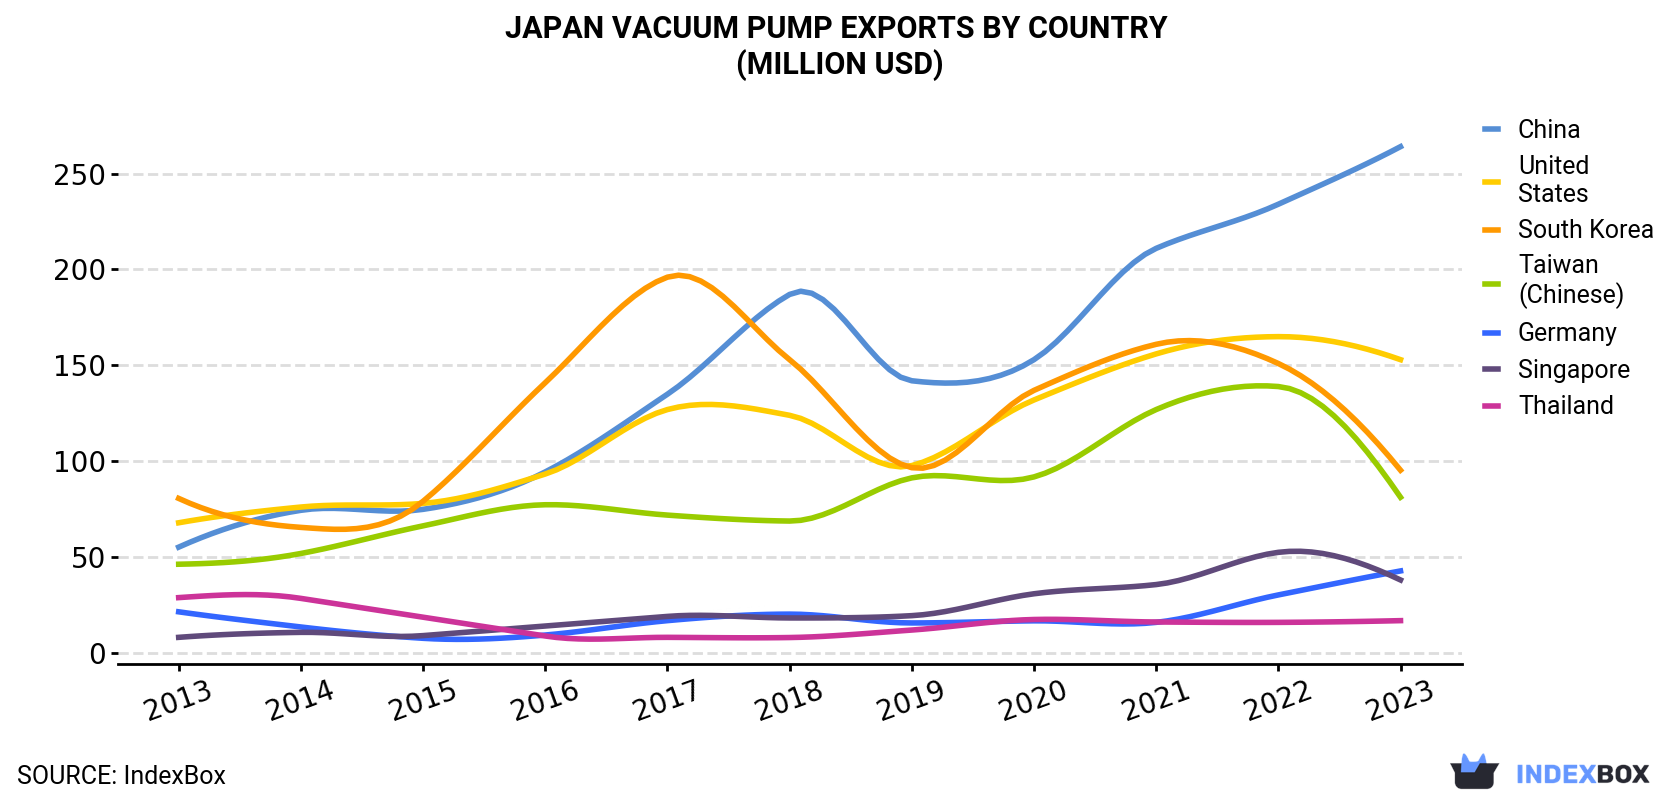 Japan Vacuum Pump Exports By Country (Million USD)